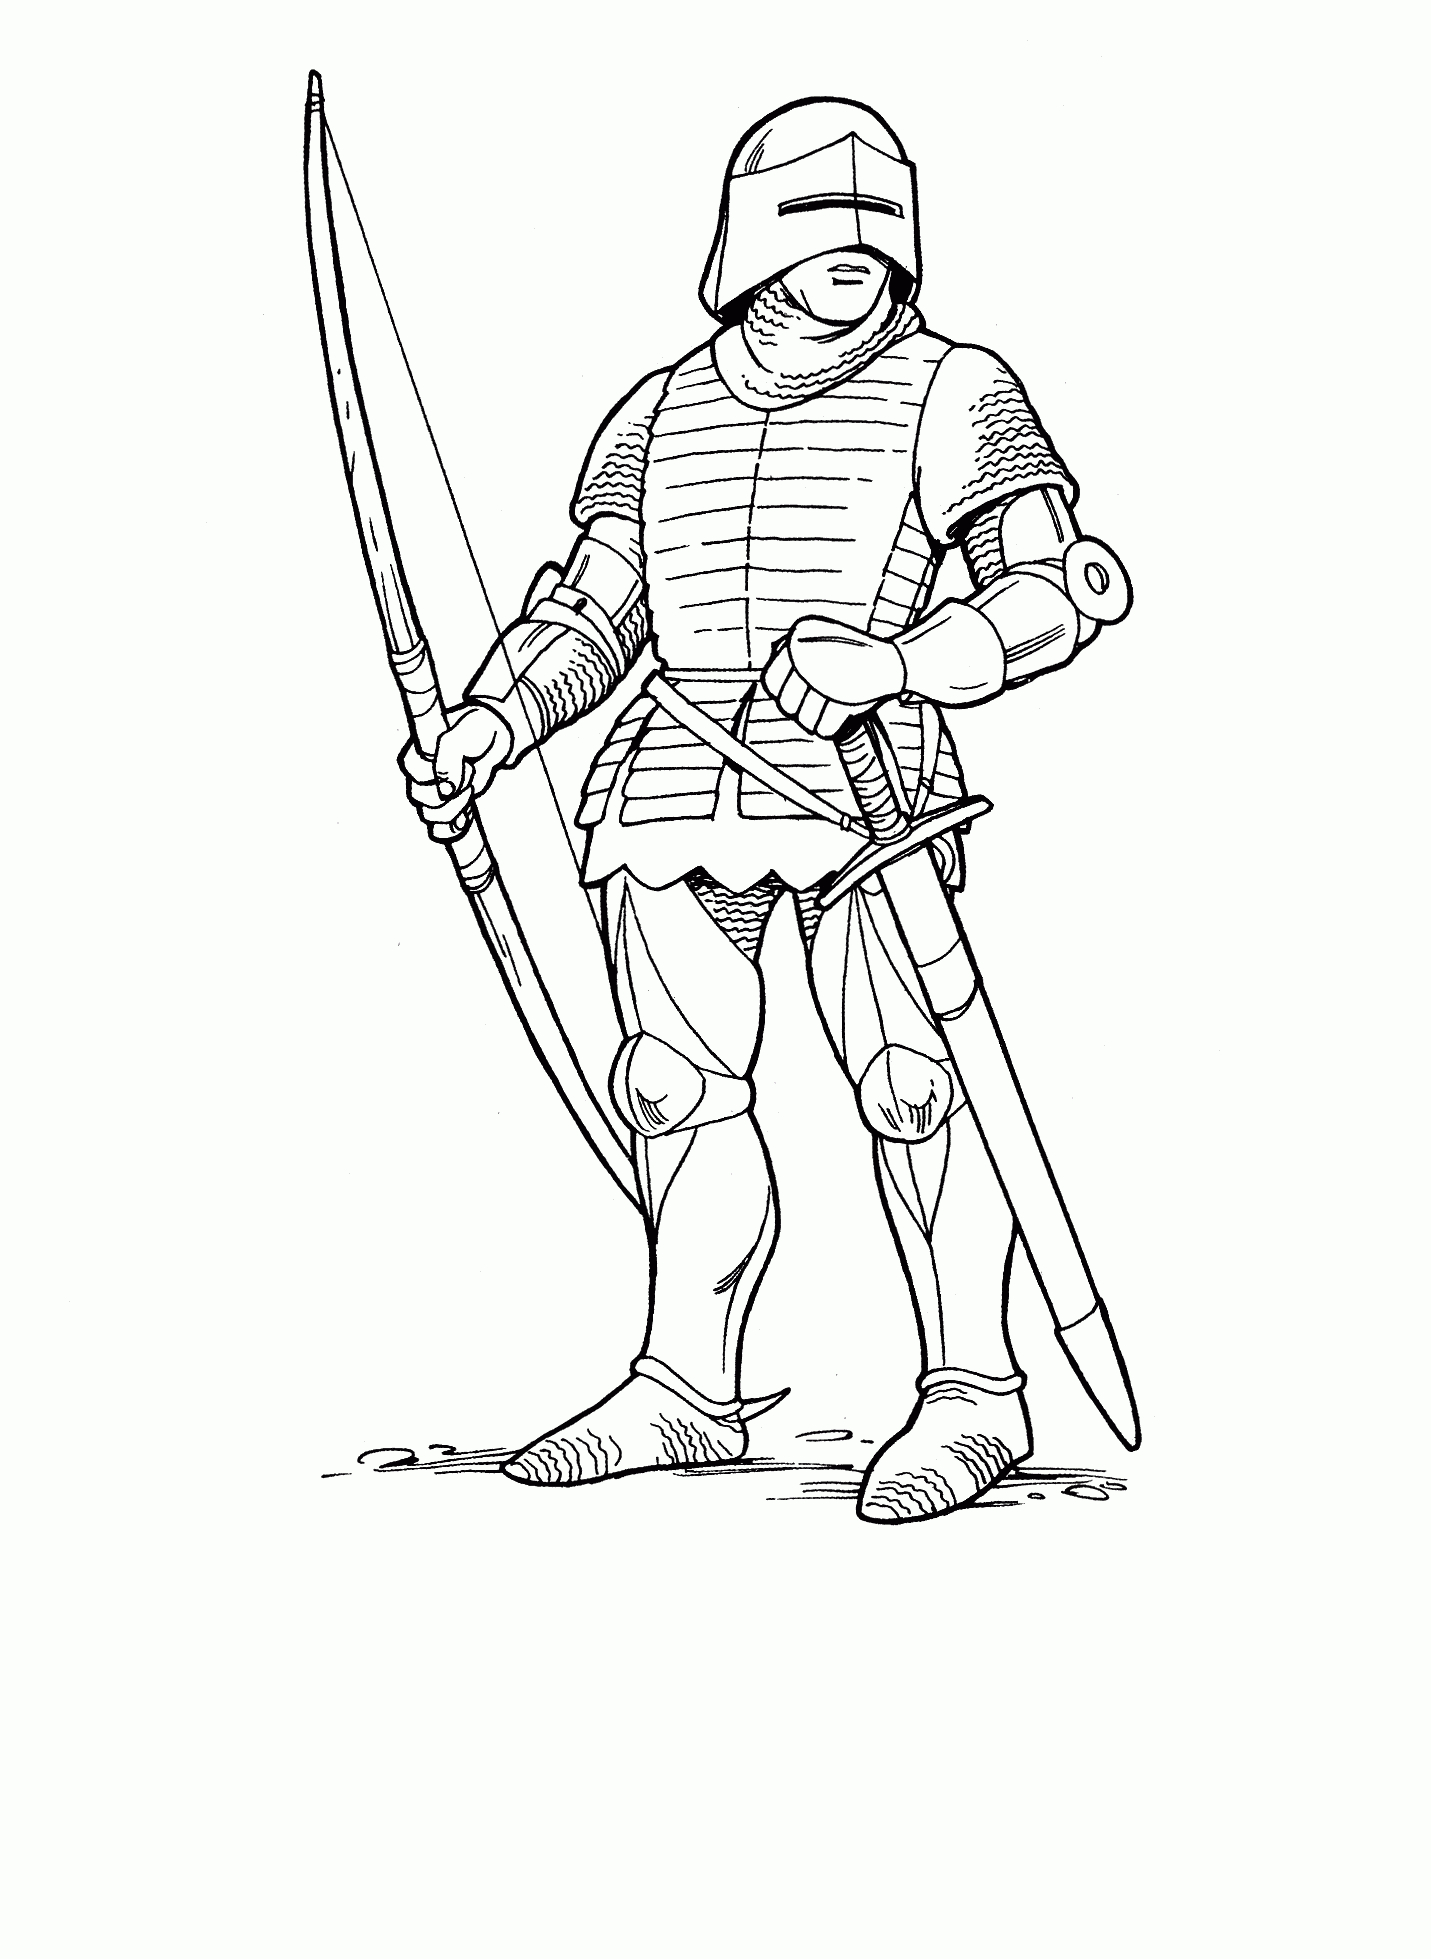 Free Printable Knight Coloring Pages For Kids - Coloring Pages - Free Printable Pictures Of Knights